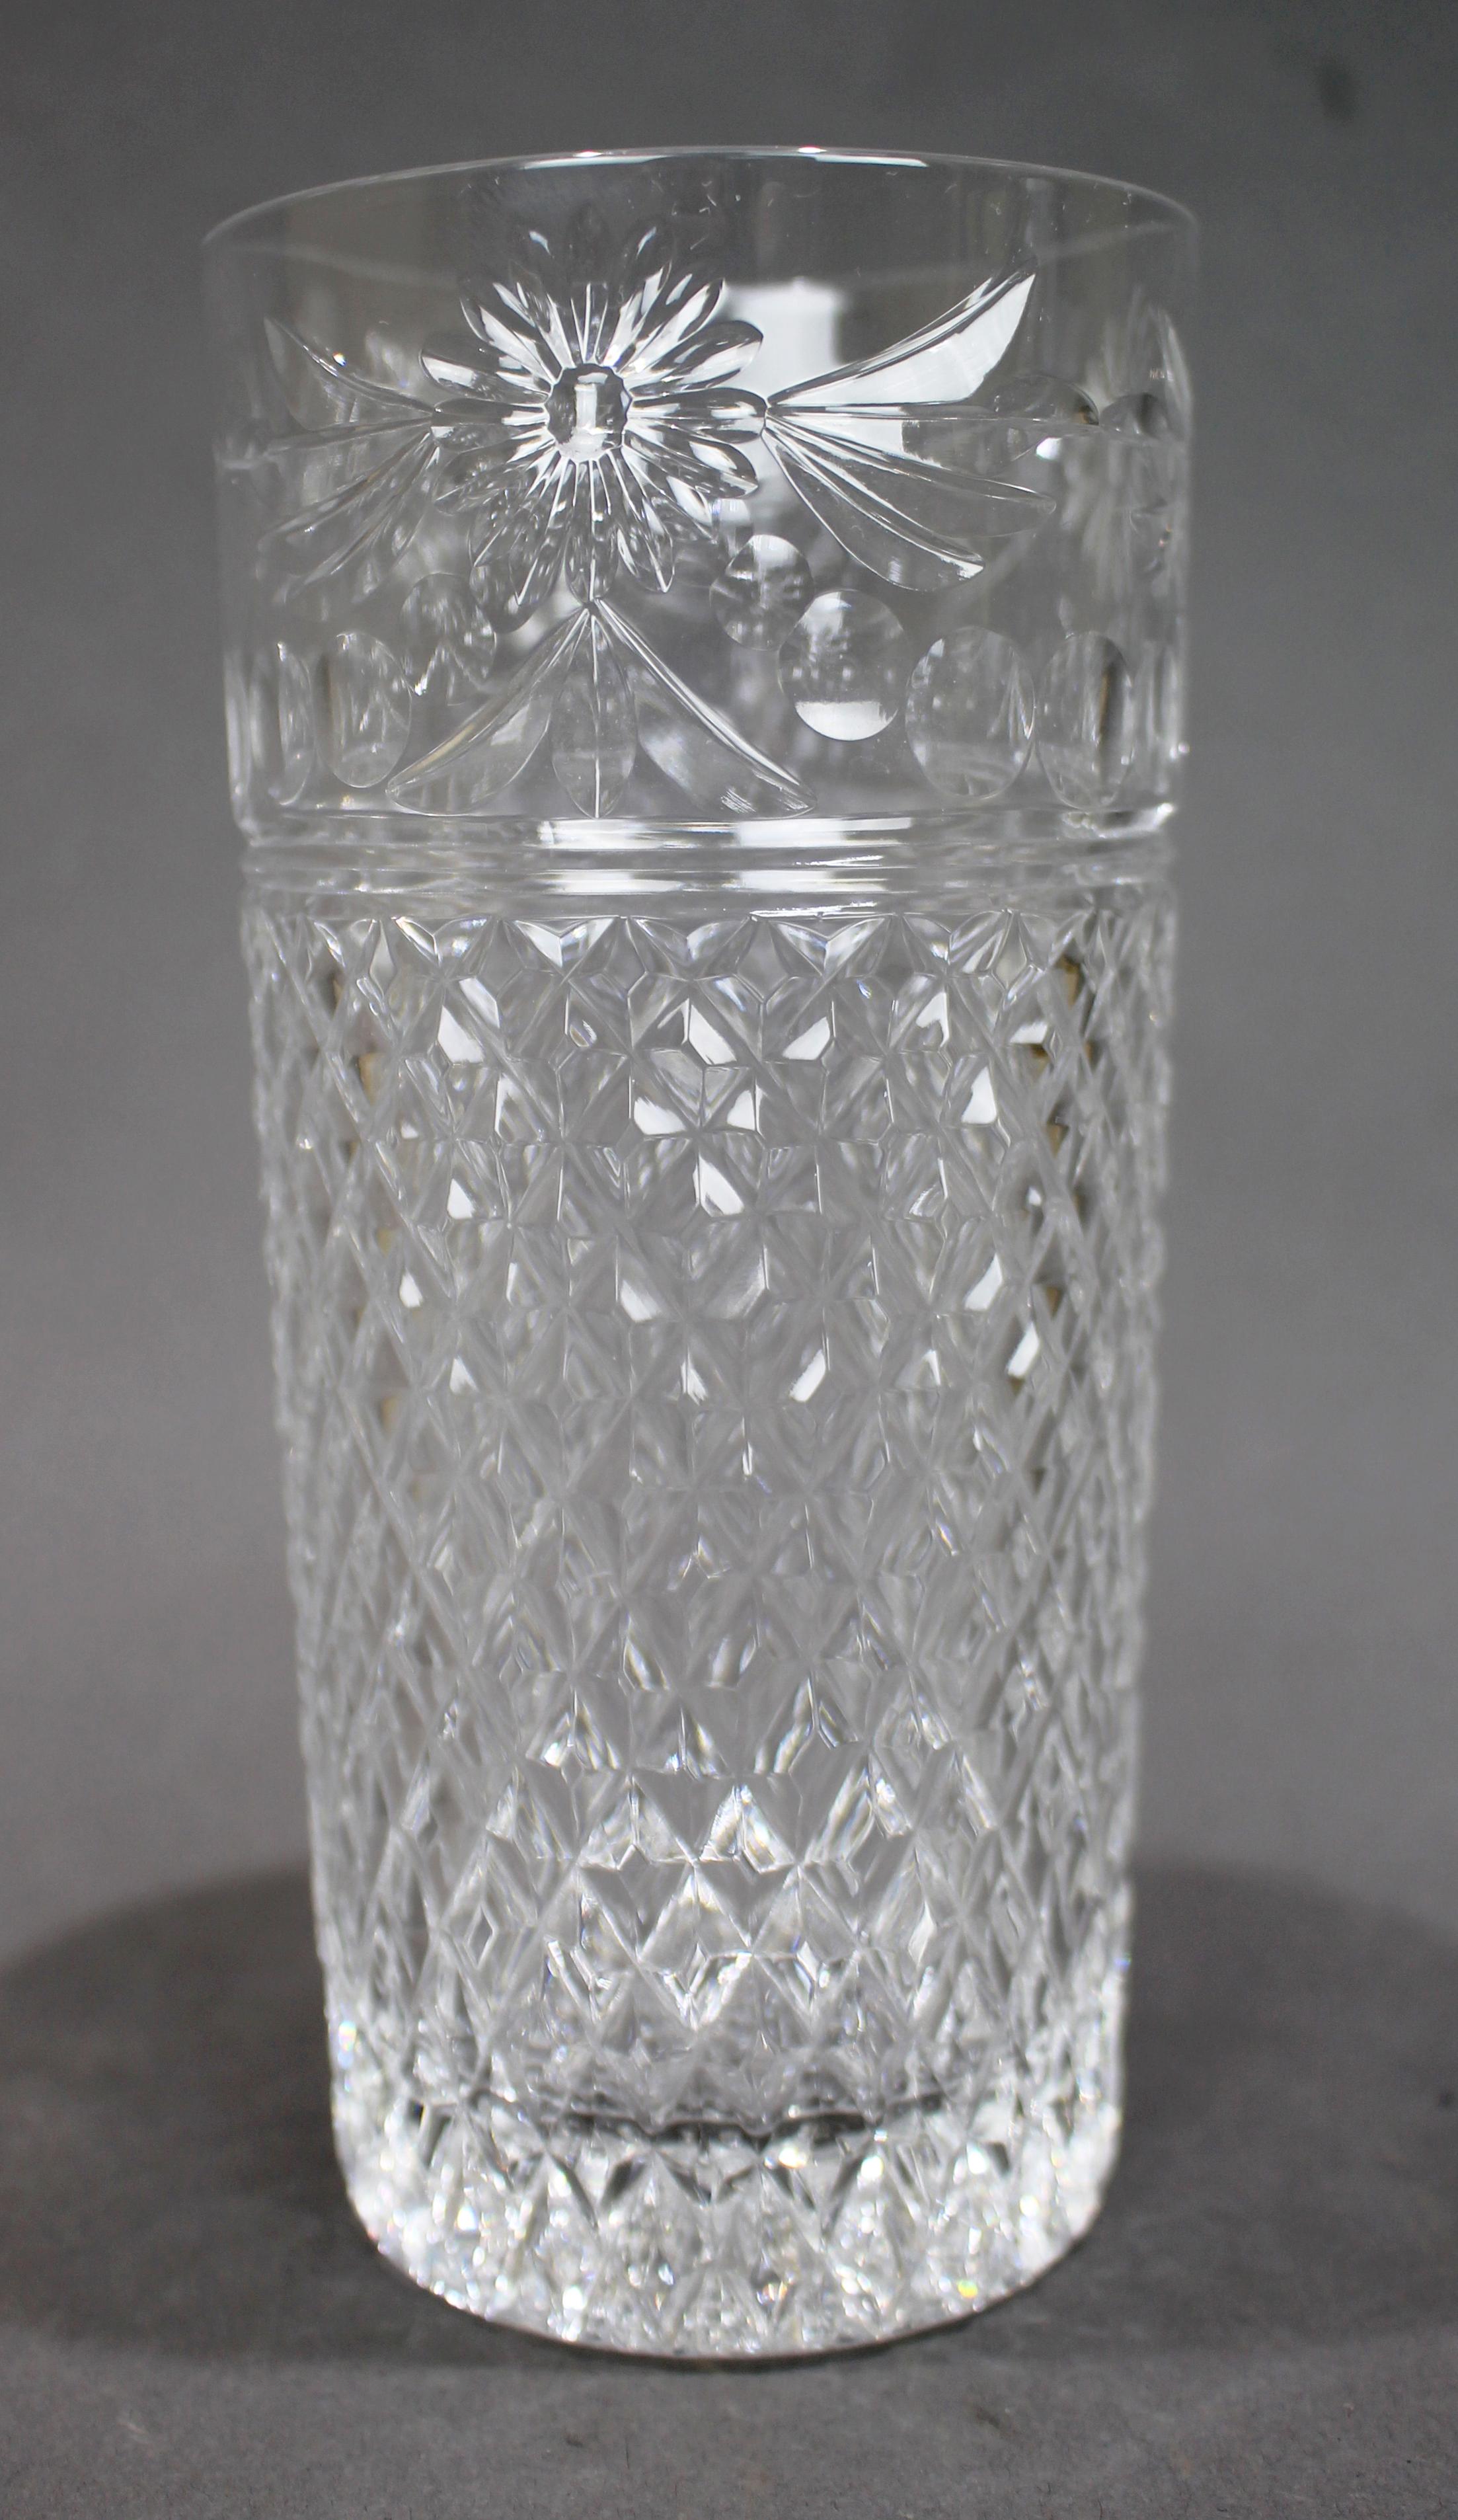 Set of 6 Stuart Beaconsfield Highball Glasses


Beautiful set of 6 Stuart crystal wine glasses. Fully hand crafted in the rare Beaconsfield pattern, heavy and with a fine cut hobnail pattern ring. 

Dating from the late 20th century and made in